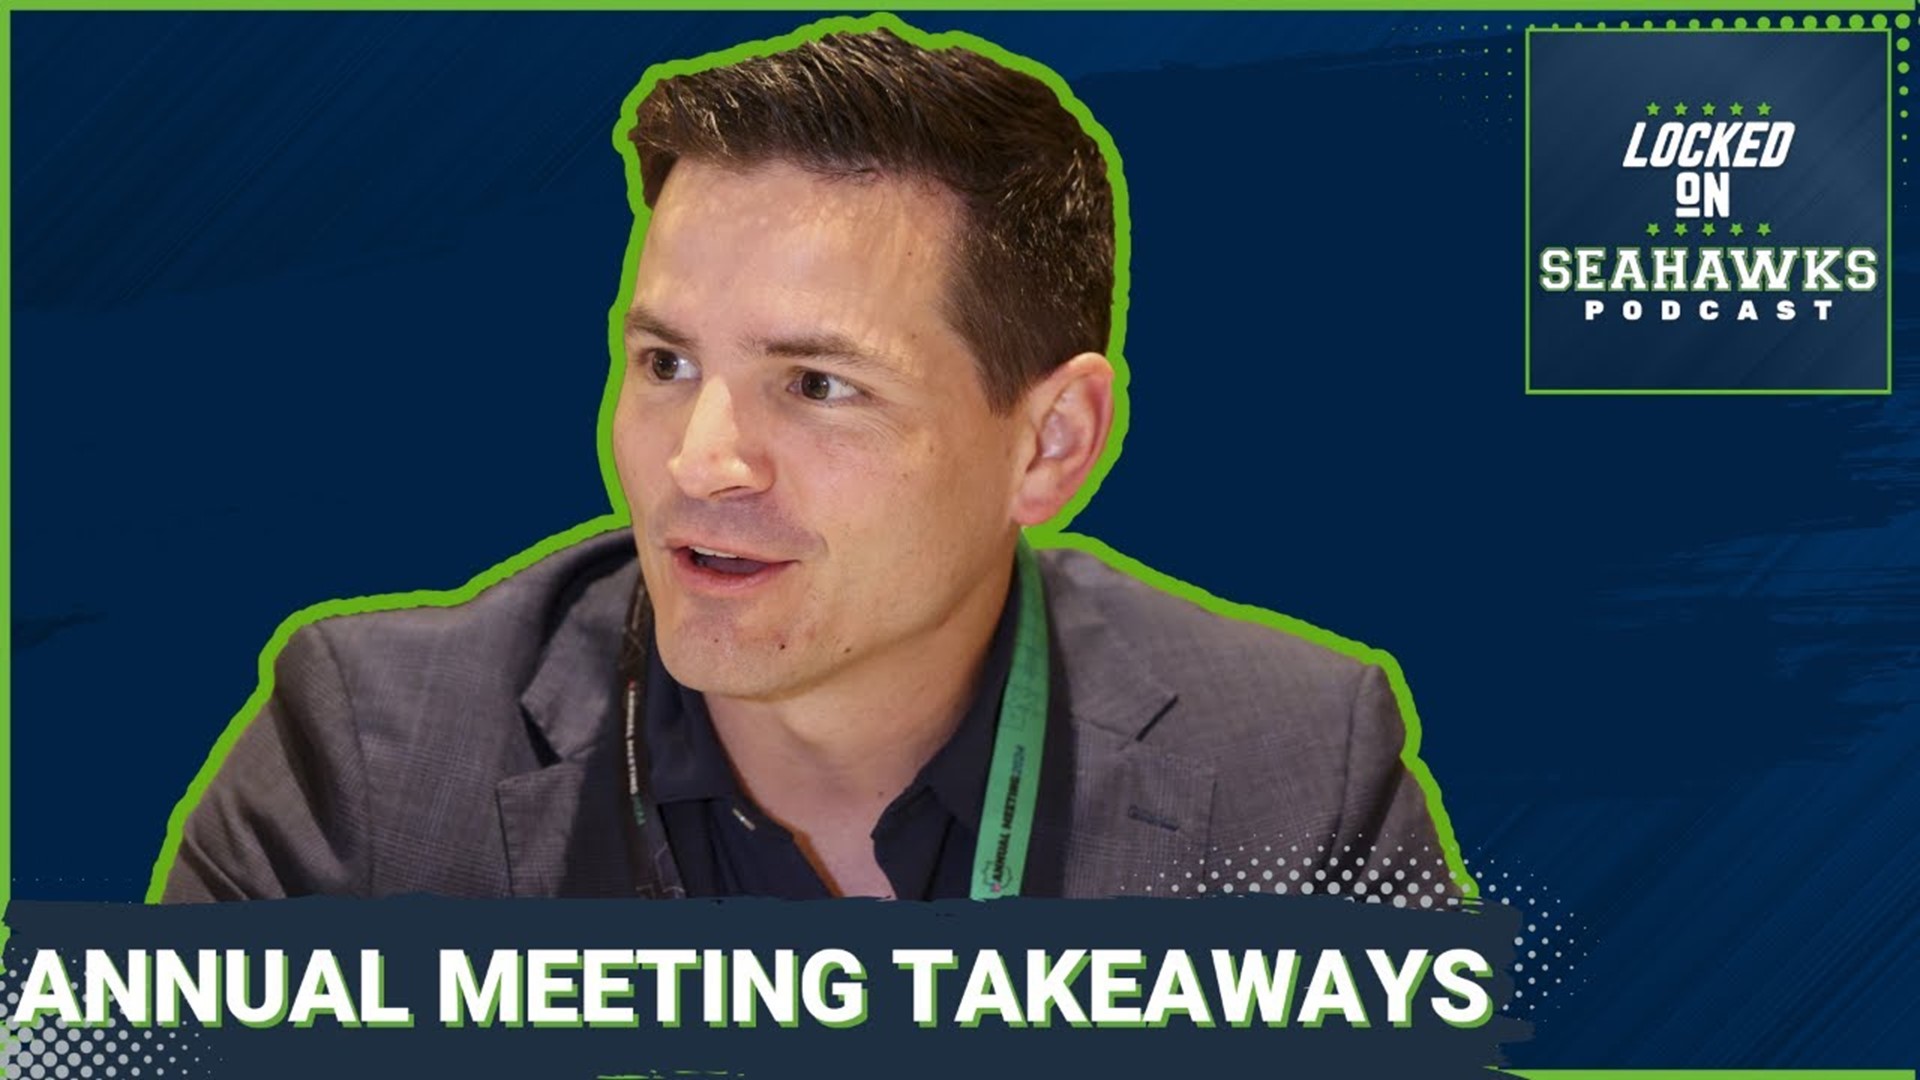 Touching on a variety of topics such as free agent scheme fits, the Sam Howell trade, and the NFL's new hip drop tackle rule, Seahawks coach Mike Macdonald